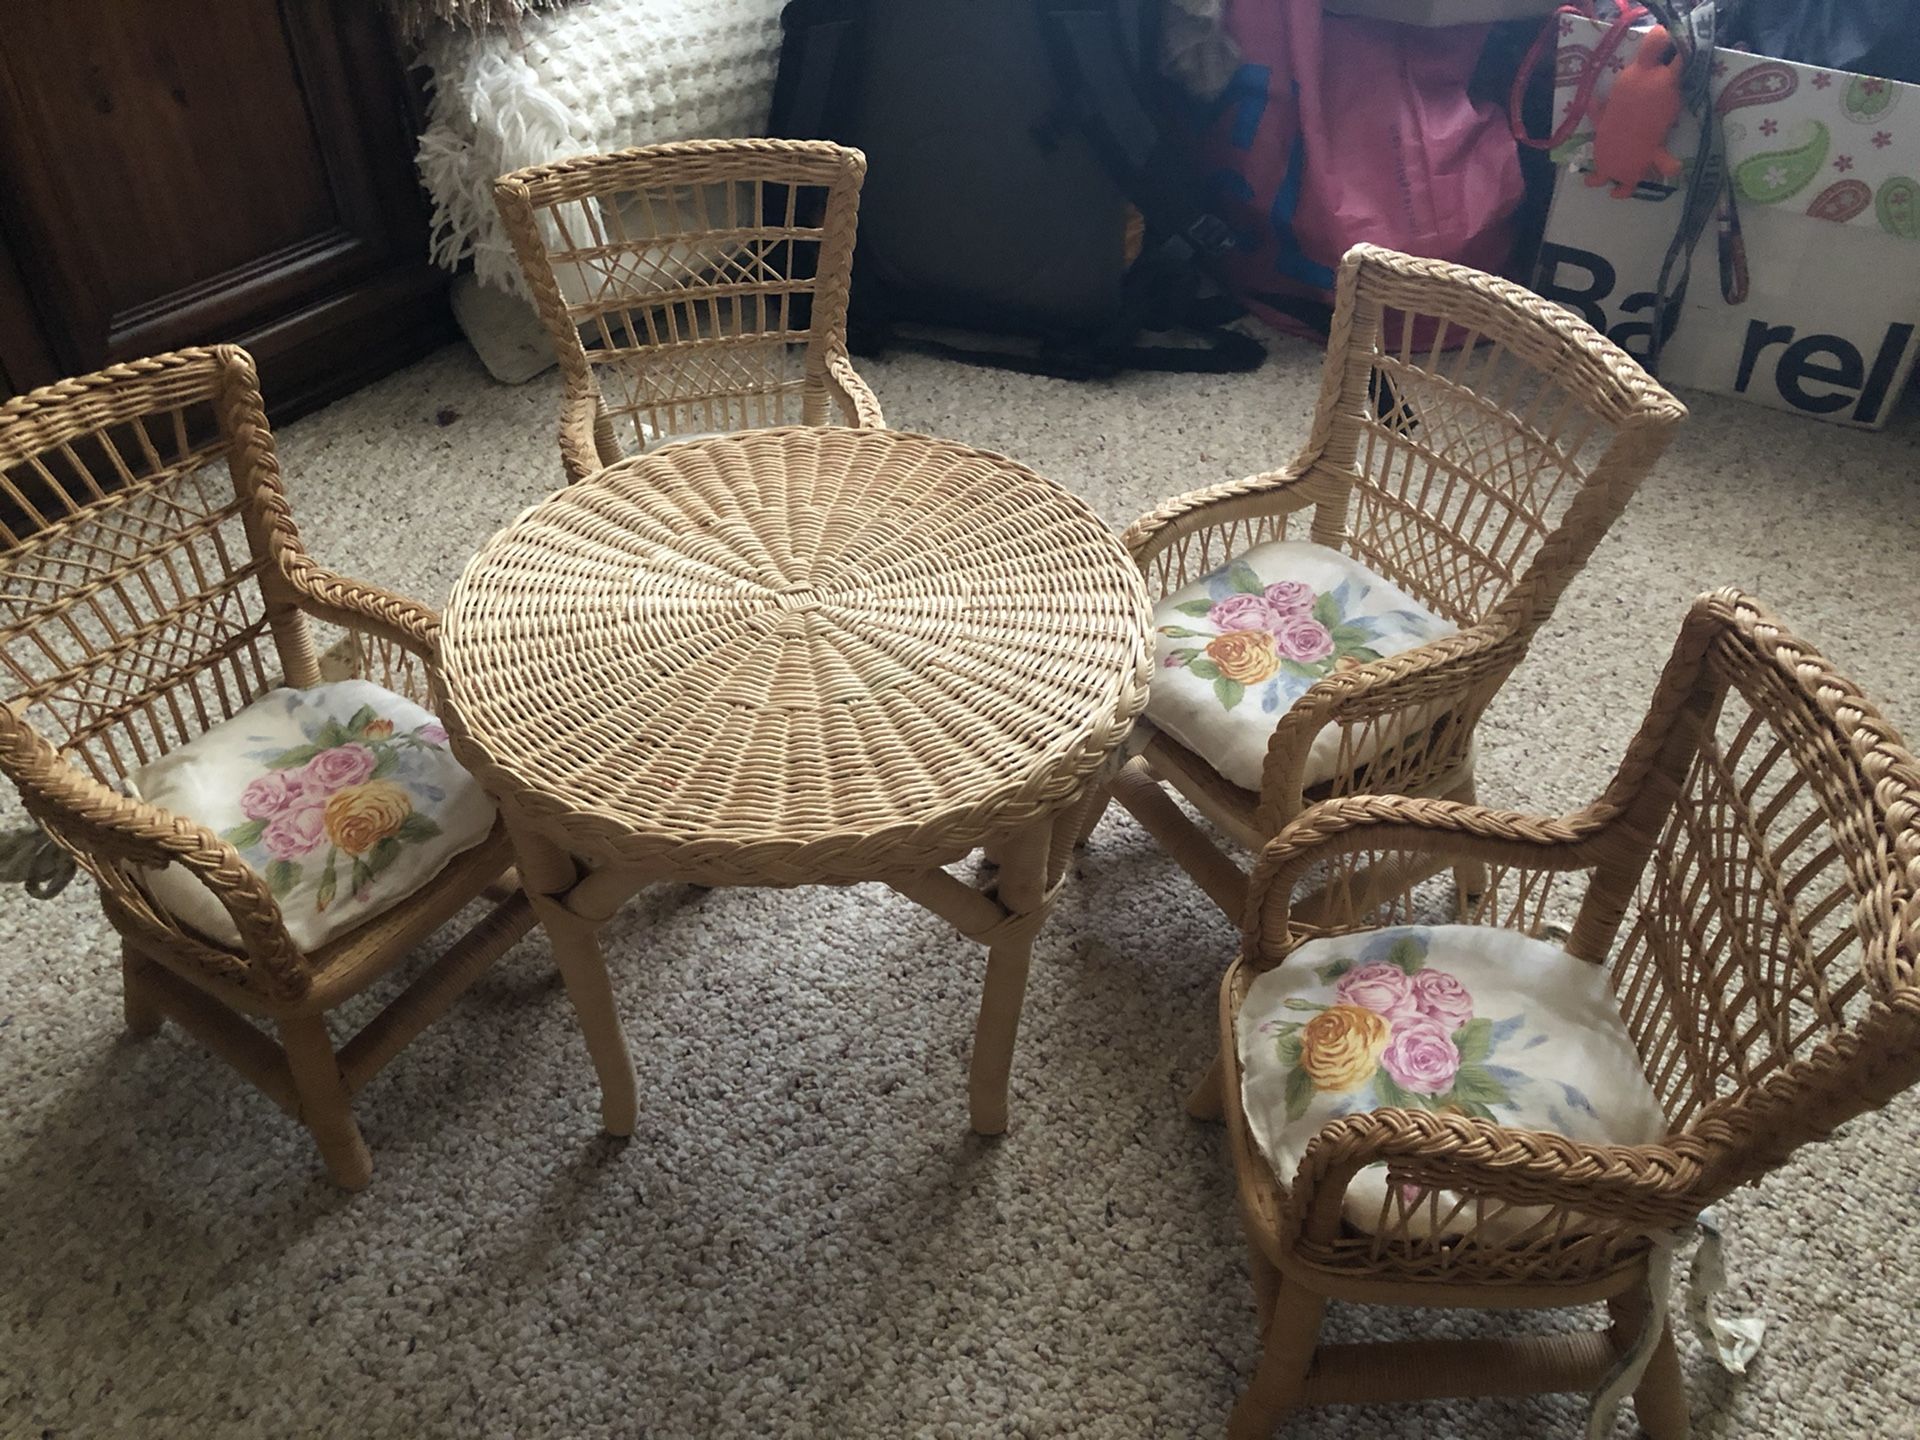 American girl doll wicker table and chairs